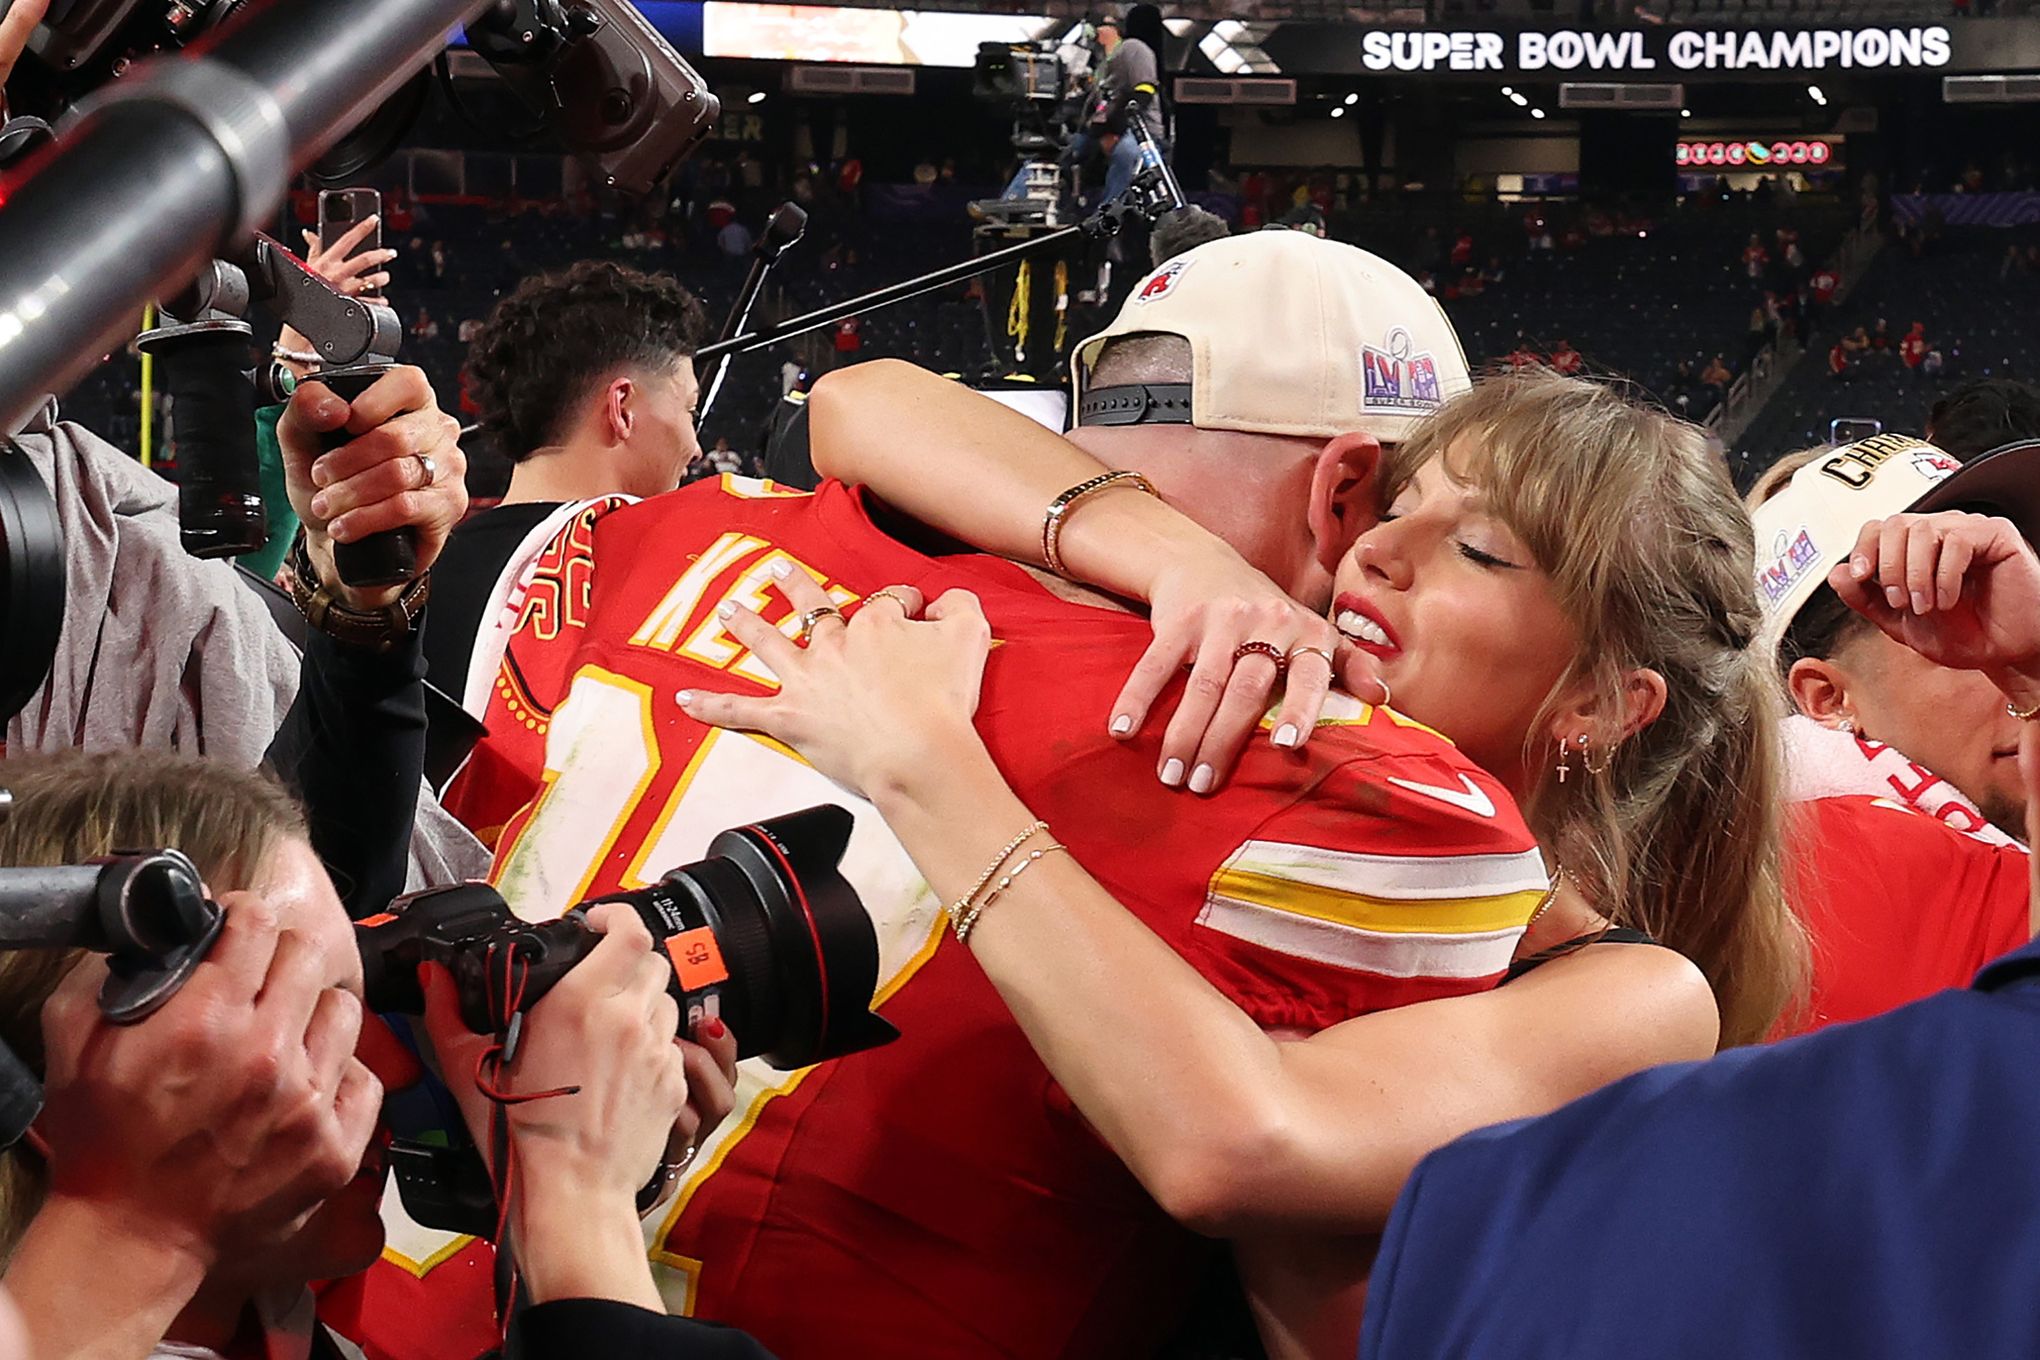 13 ways to avoid seeing Taylor Swift during the Super Bowl - Upworthy